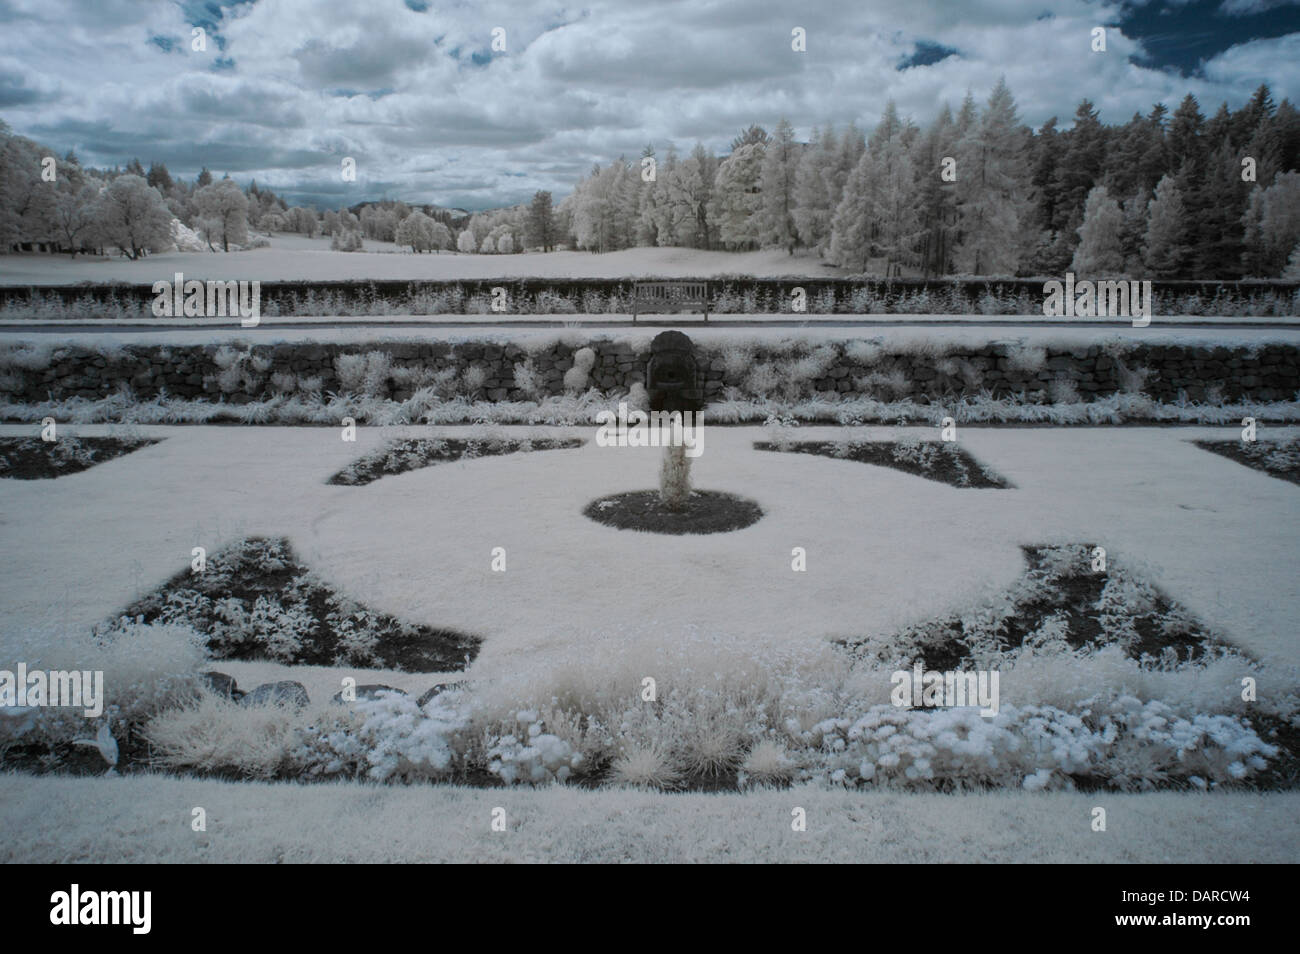 Horizontal Infrared image of gardens in front of Balmoral Castle, Royal Deeside, Scotland, UK with trees and clouds. Stock Photo